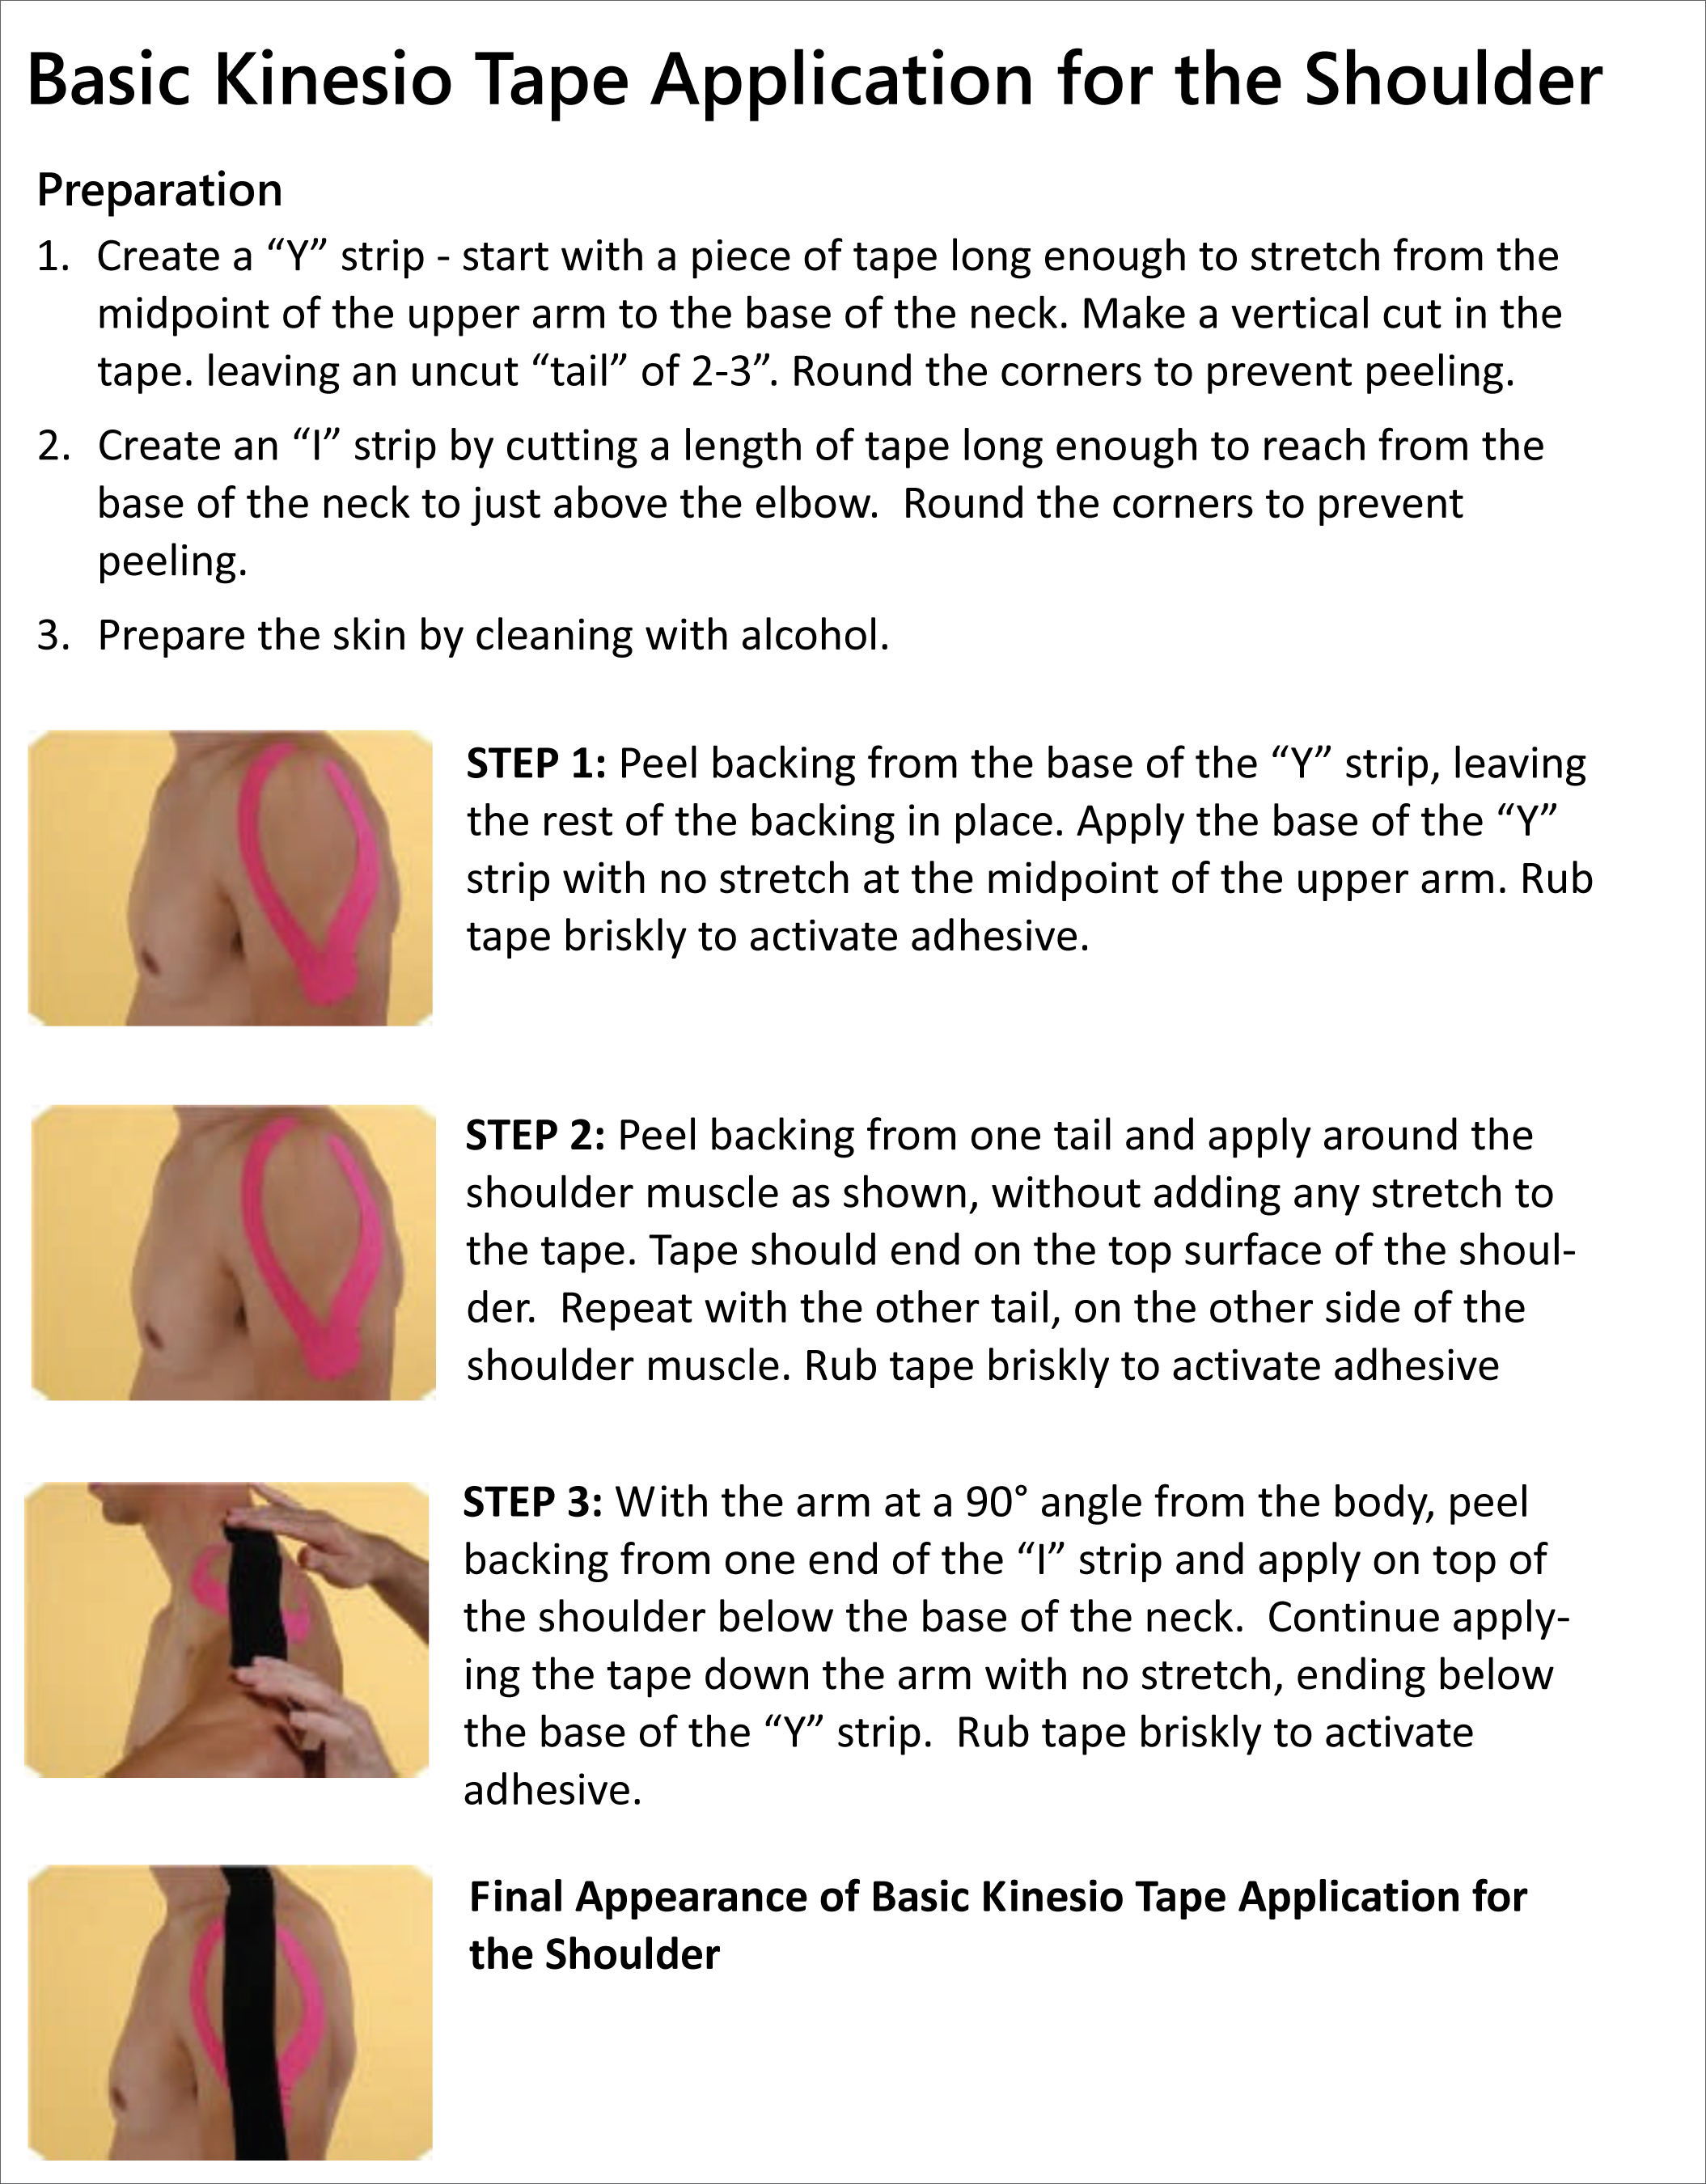 kinesio-instructions-shoulder